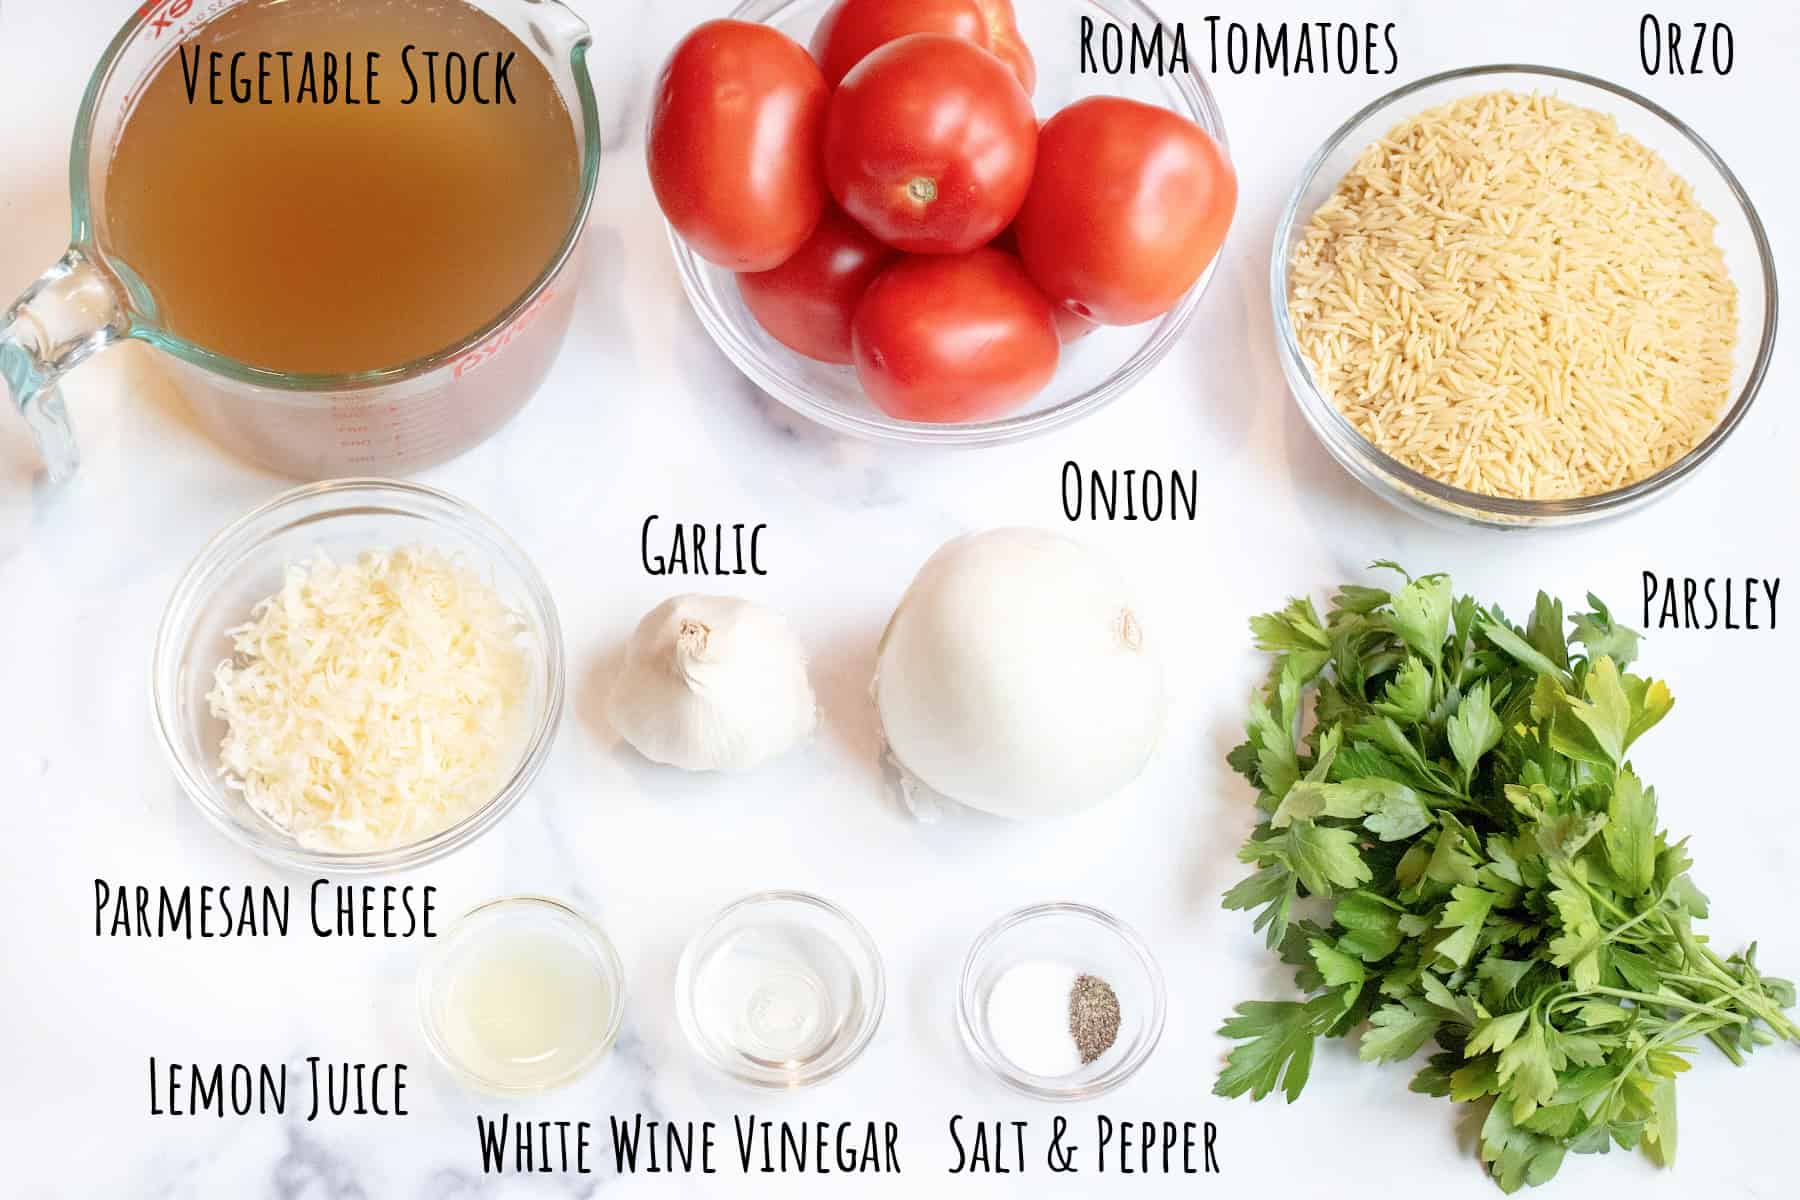 stock, a bowl of tomatoes, orzo, cheese, onion, garlic, slices, vinegar, and parsley.